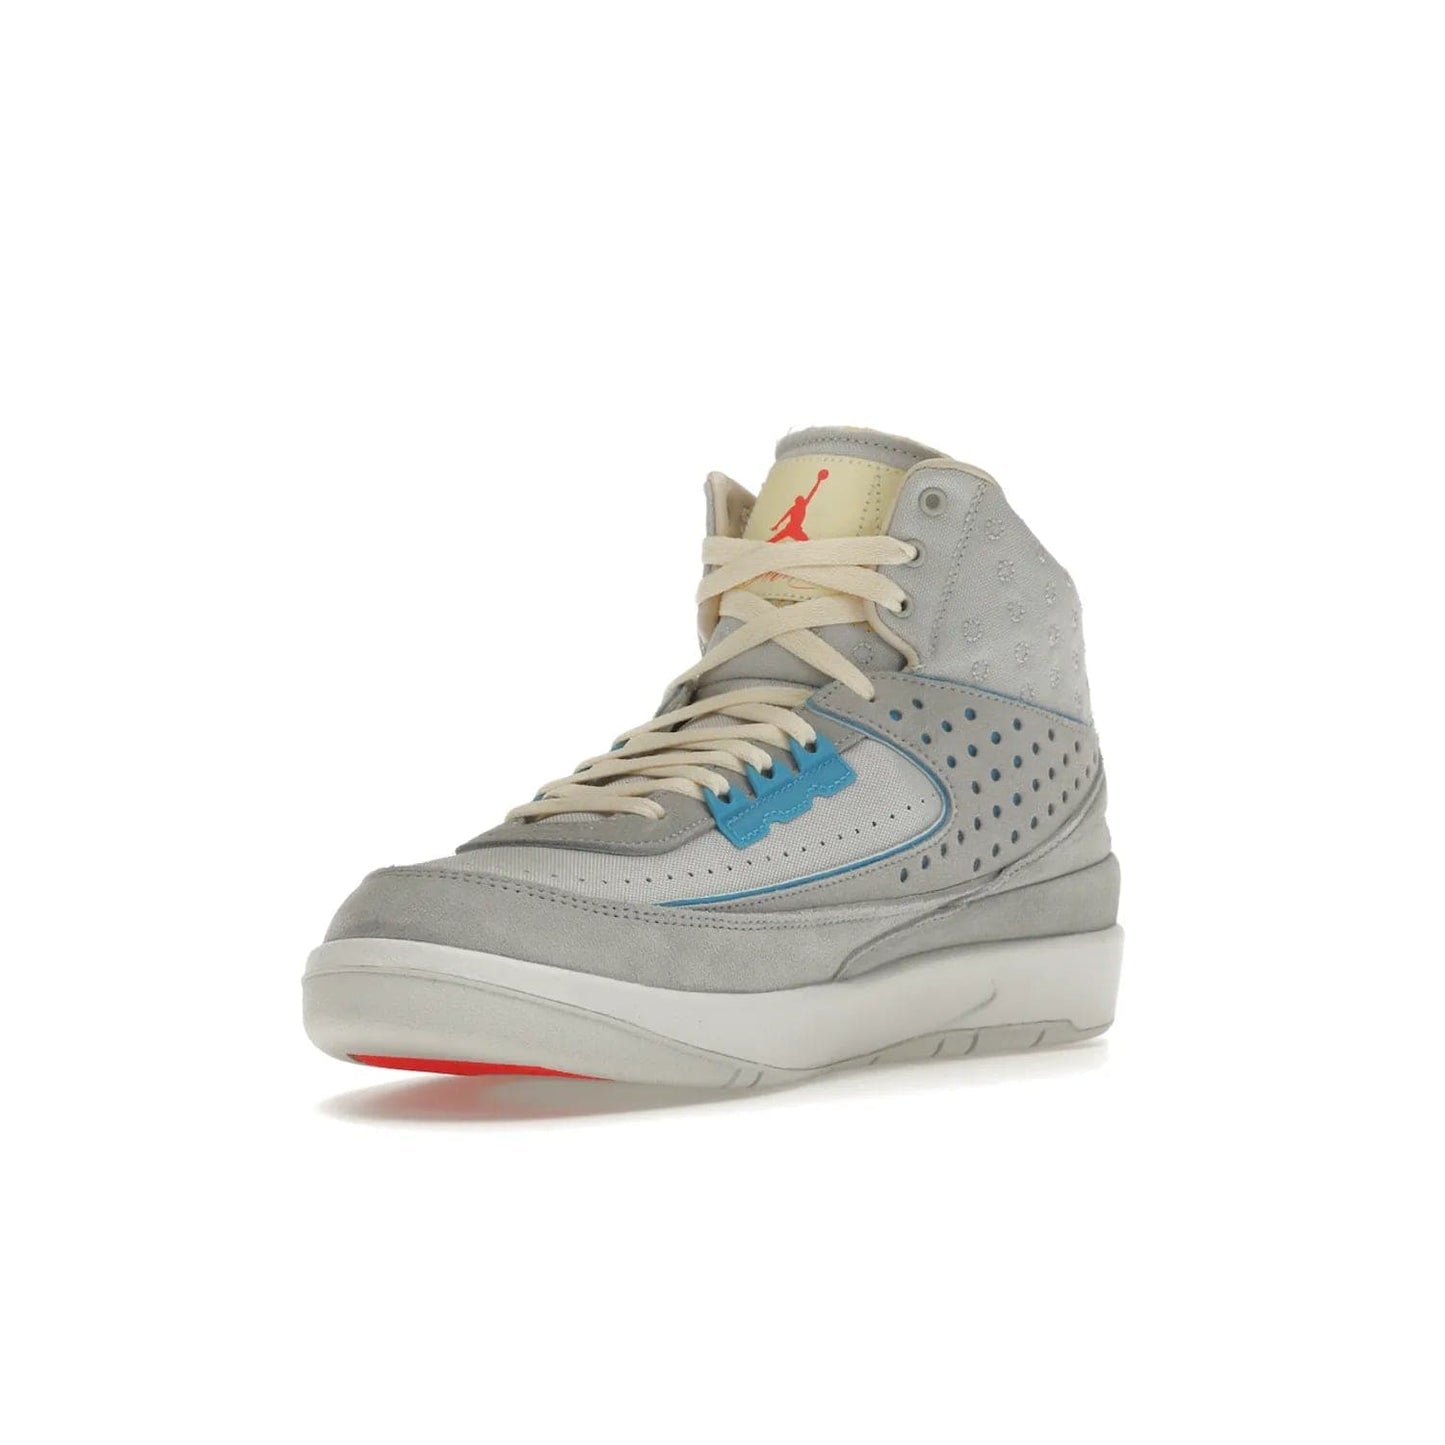 Jordan 2 Retro SP Union Grey Fog - Image 14 - Only at www.BallersClubKickz.com - Introducing the Air Jordan 2 Retro SP Union Grey Fog. This intricate sneaker design features a grey canvas upper with light blue eyelets, eyestay patches, and piping, plus custom external tags. Dropping in April 2022, this exclusive release offers a worn-in look and feel.